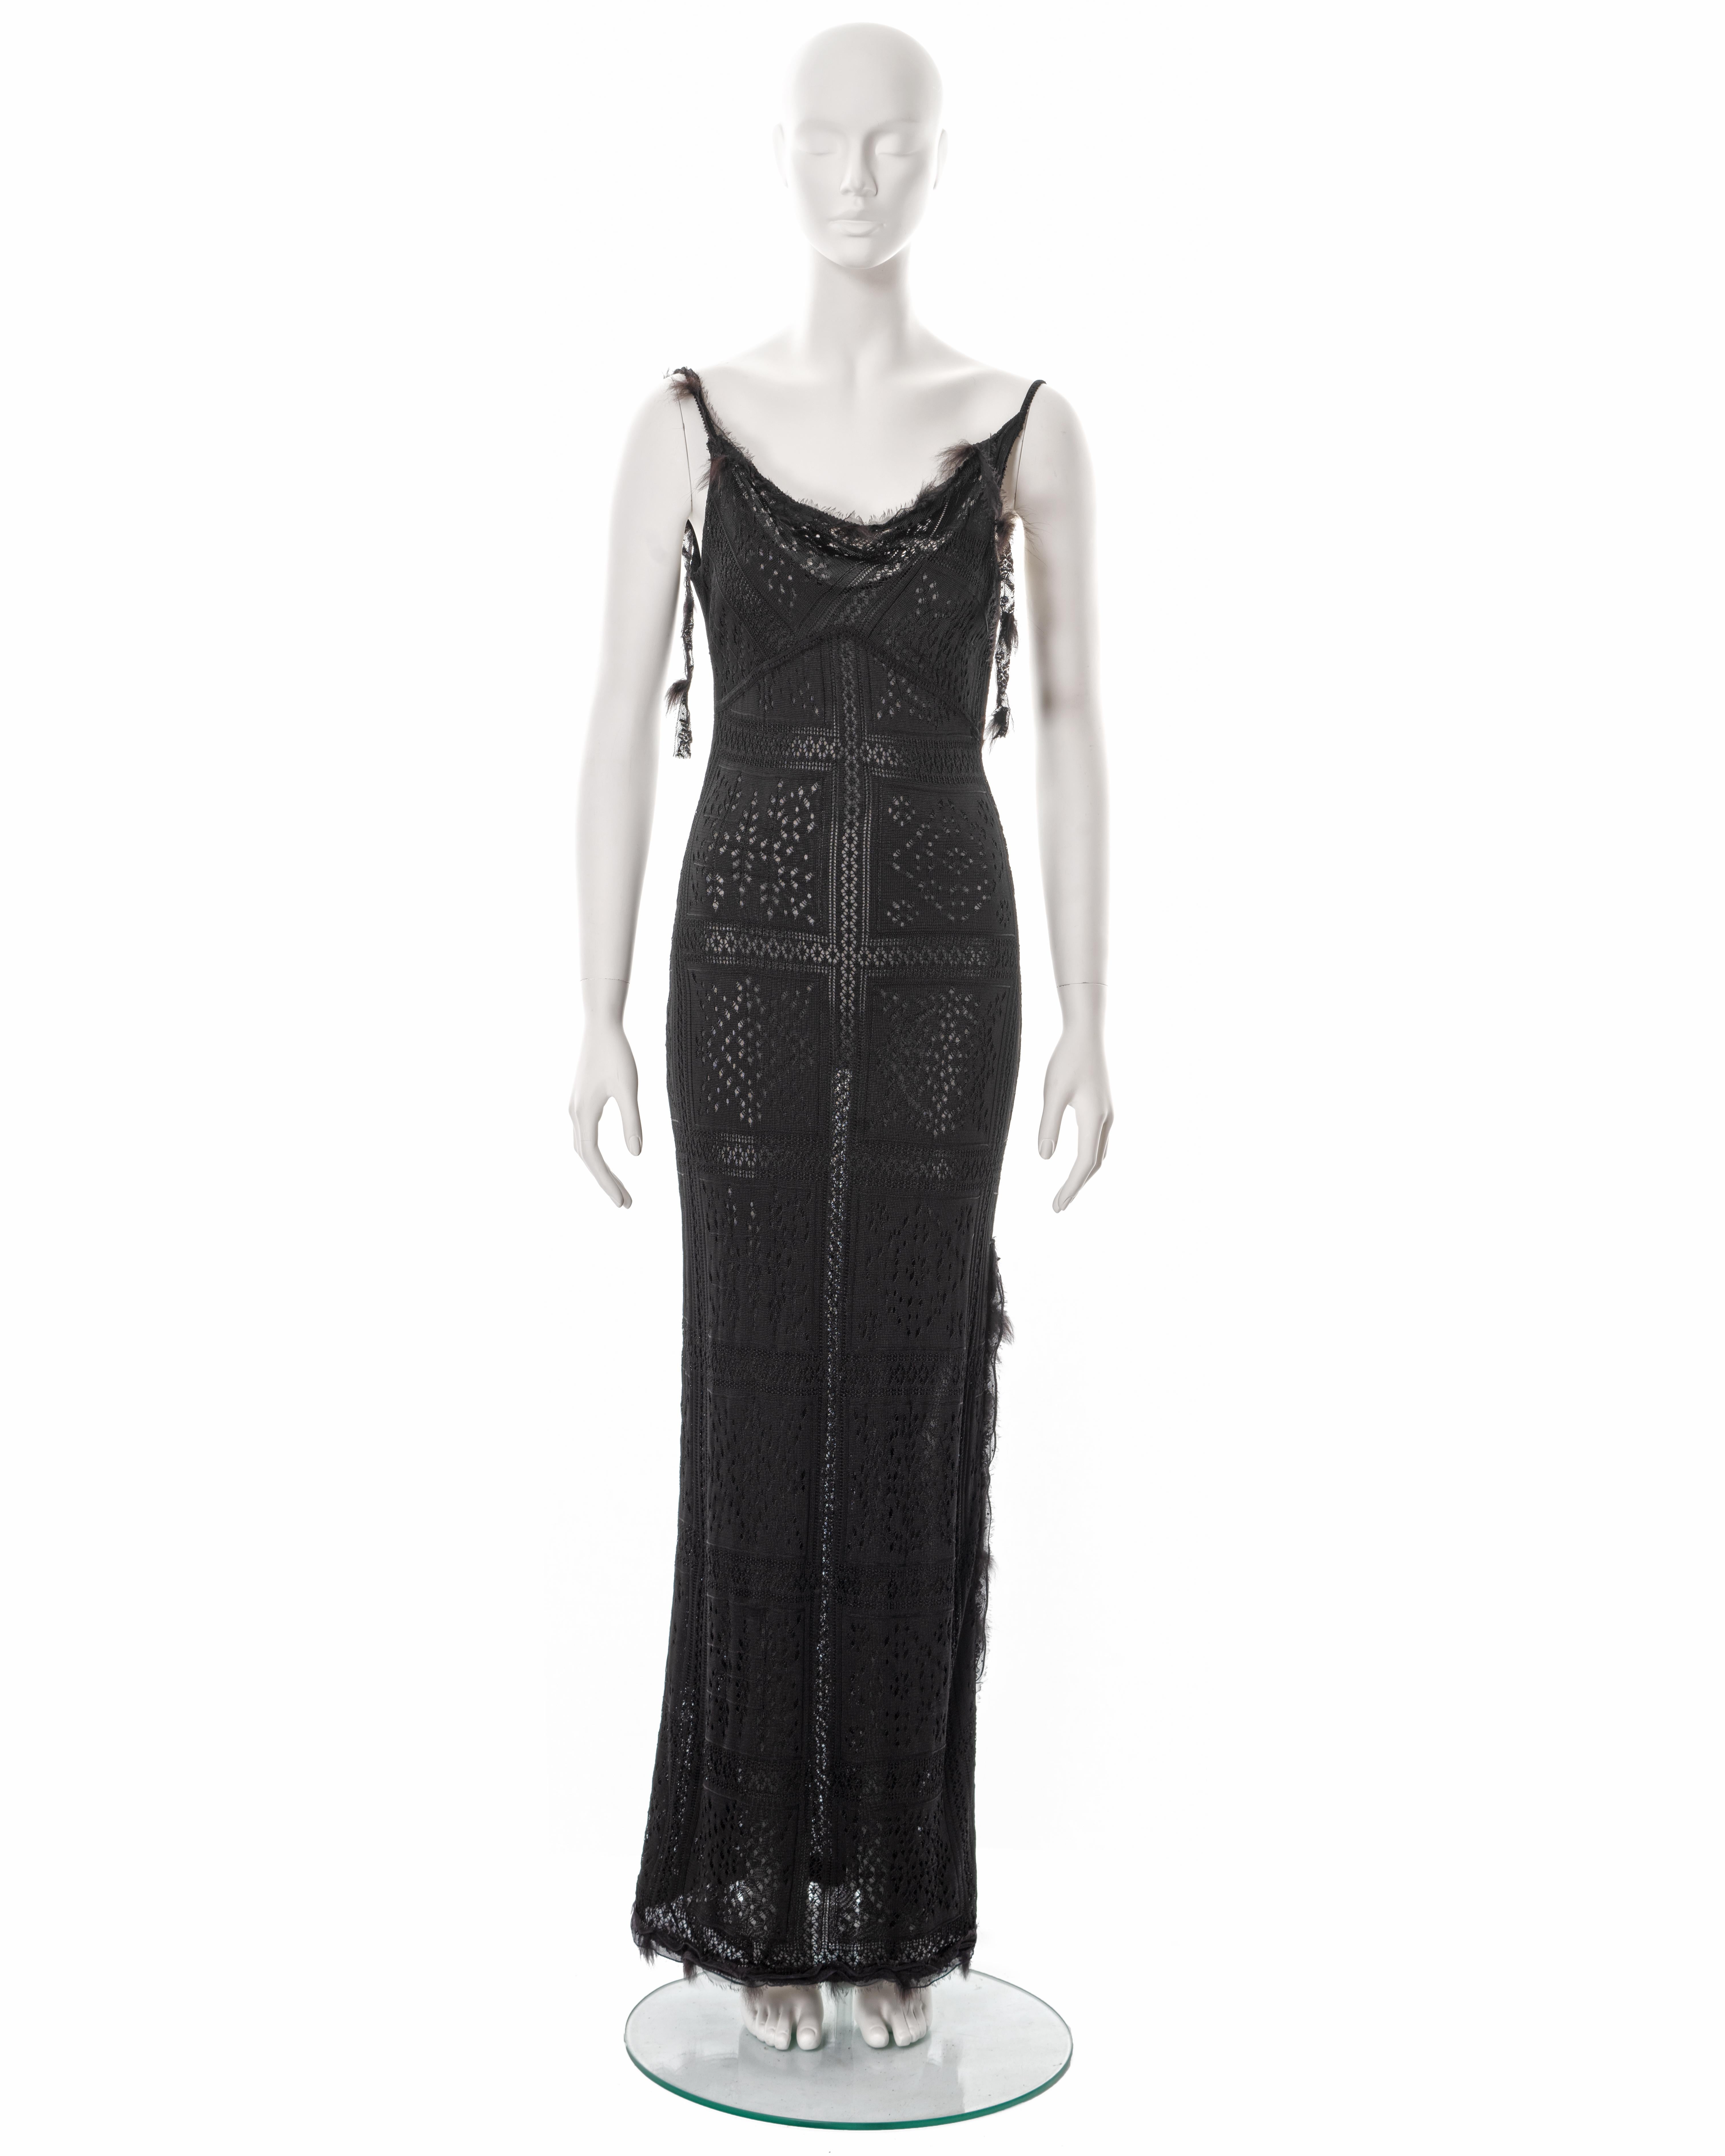 ▪ John Galliano evening maxi dress
▪ Sold by One of a Kind Archive
▪ Fall-Winter 2001
▪ Constructed from lace-knitted viscose 
▪ Cowl neck 
▪ Lace ribbon trimmings with fur 
▪ Floor-length skirt with leg slit
▪ Size Large
▪ Made in Italy

All